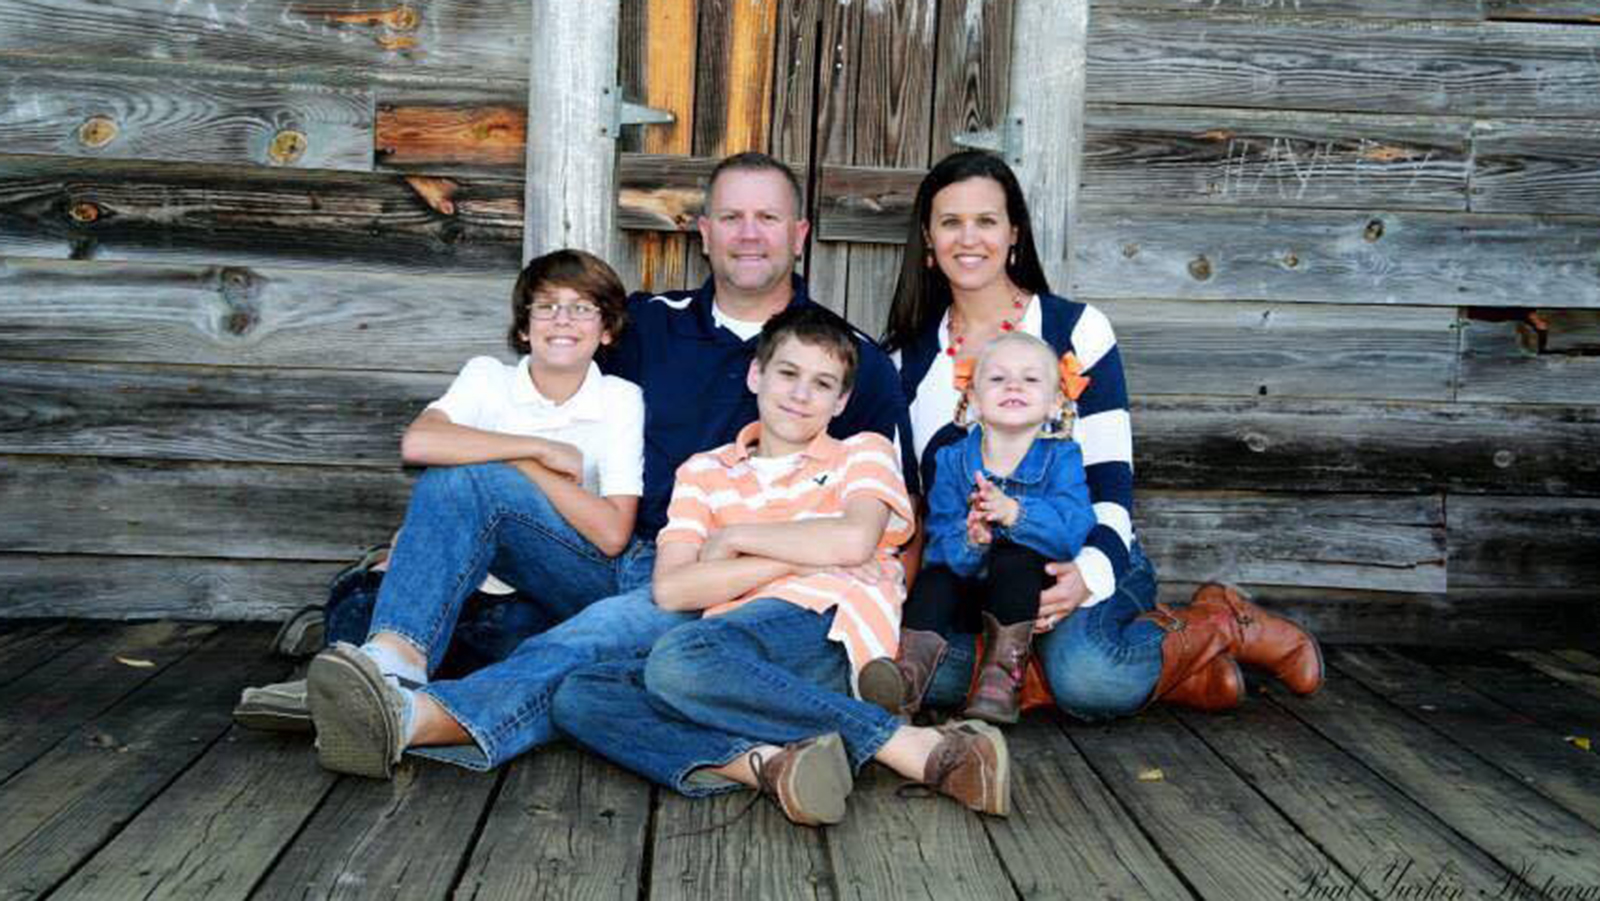 The Hadden Family. Marc Hadden with his wife, two sons, and adoptive daughter Gracie